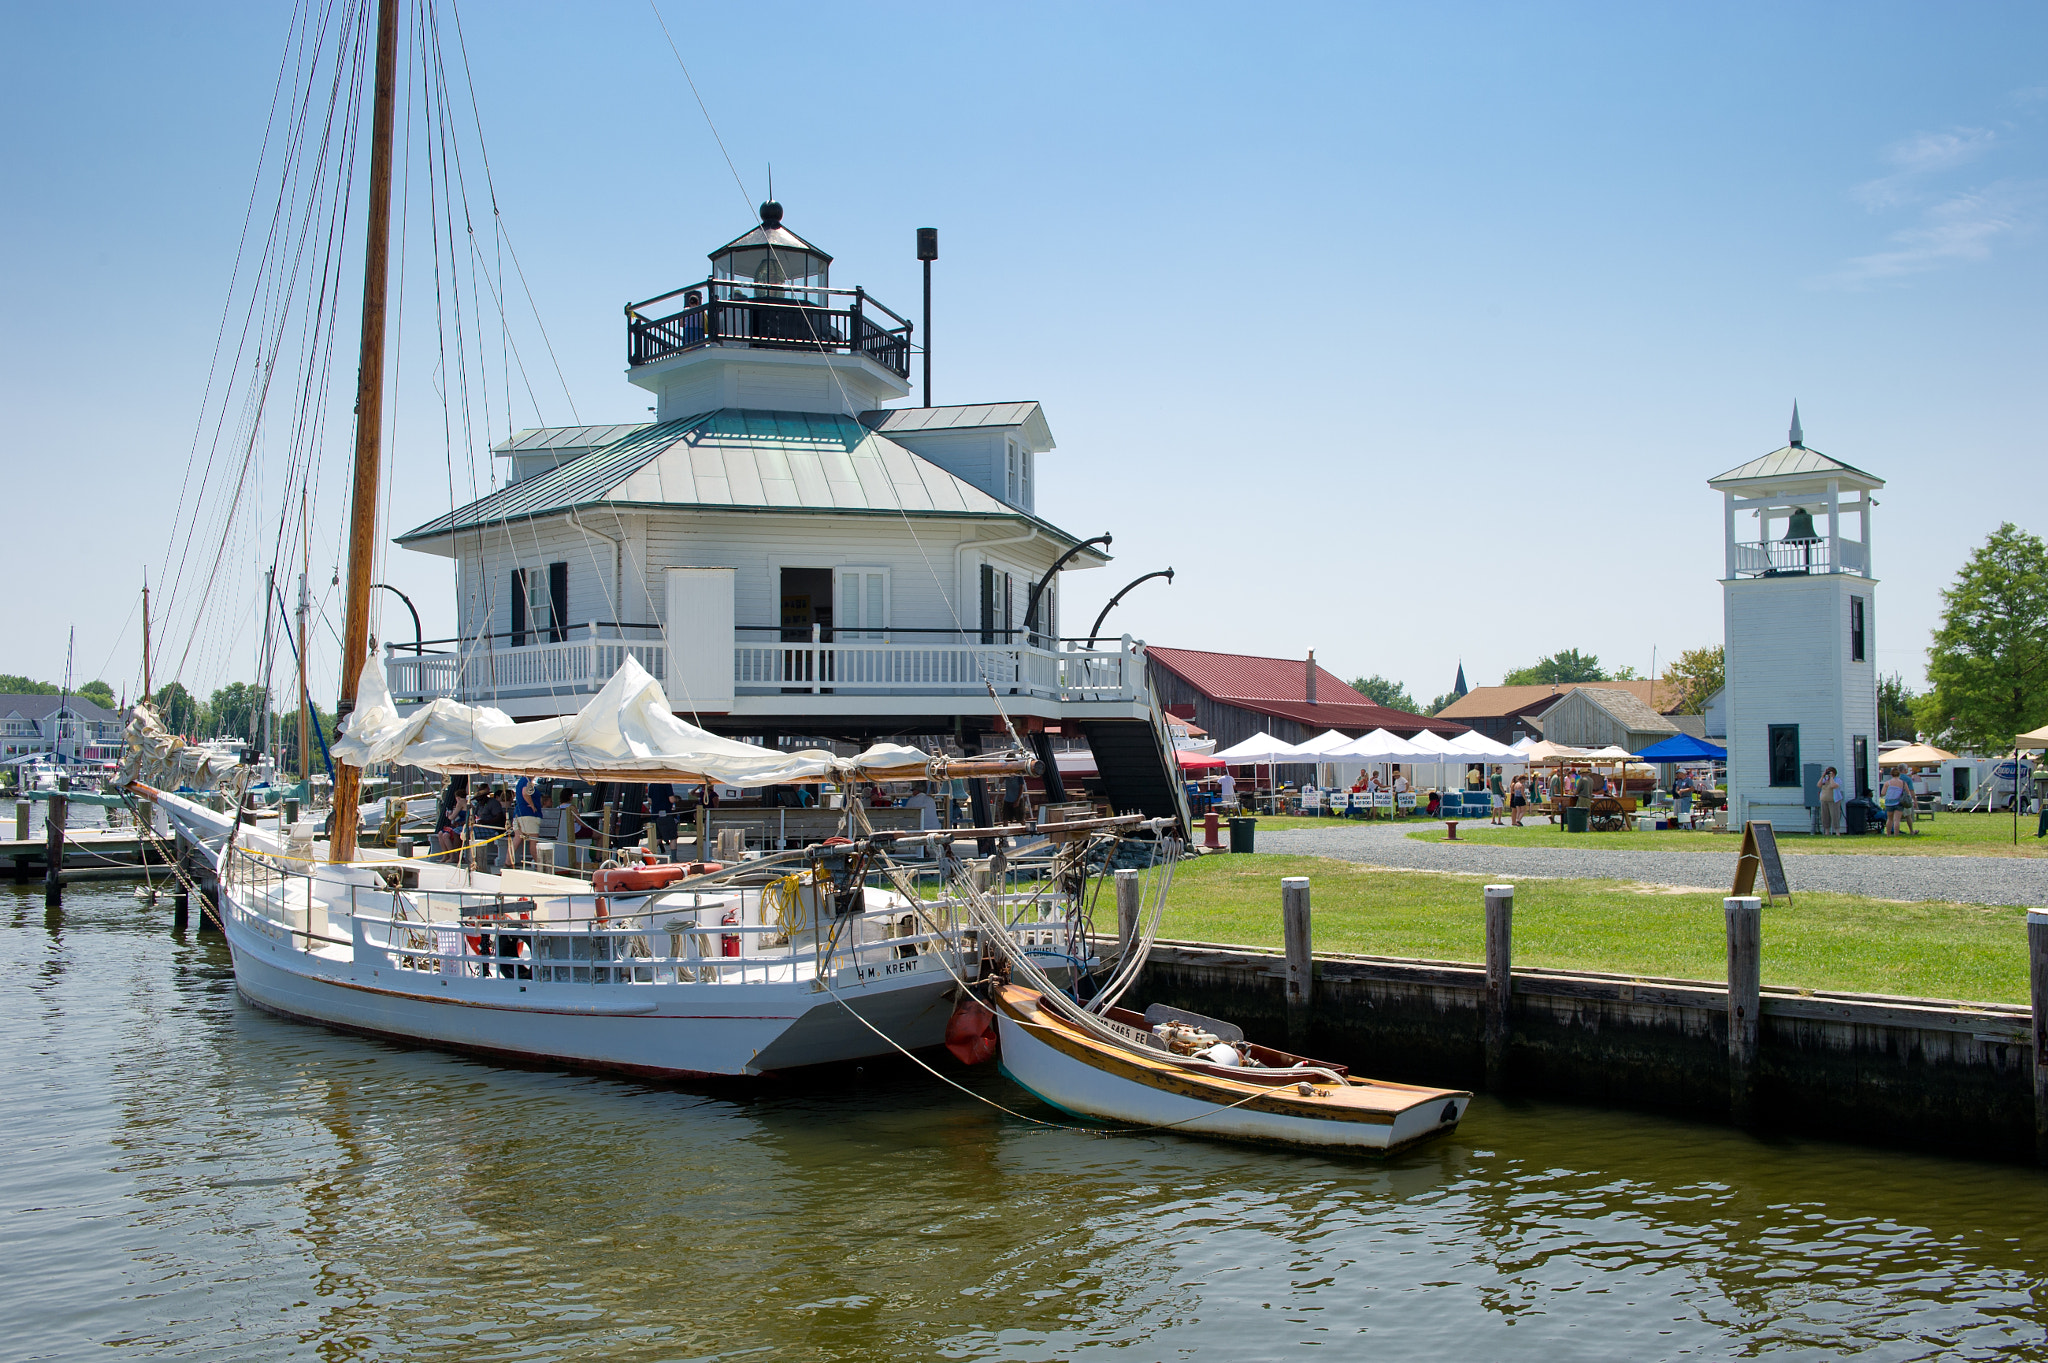 Nikon D3S sample photo. Boat docked in front of festival at chesapeake maritime museum in st. michaels md photography